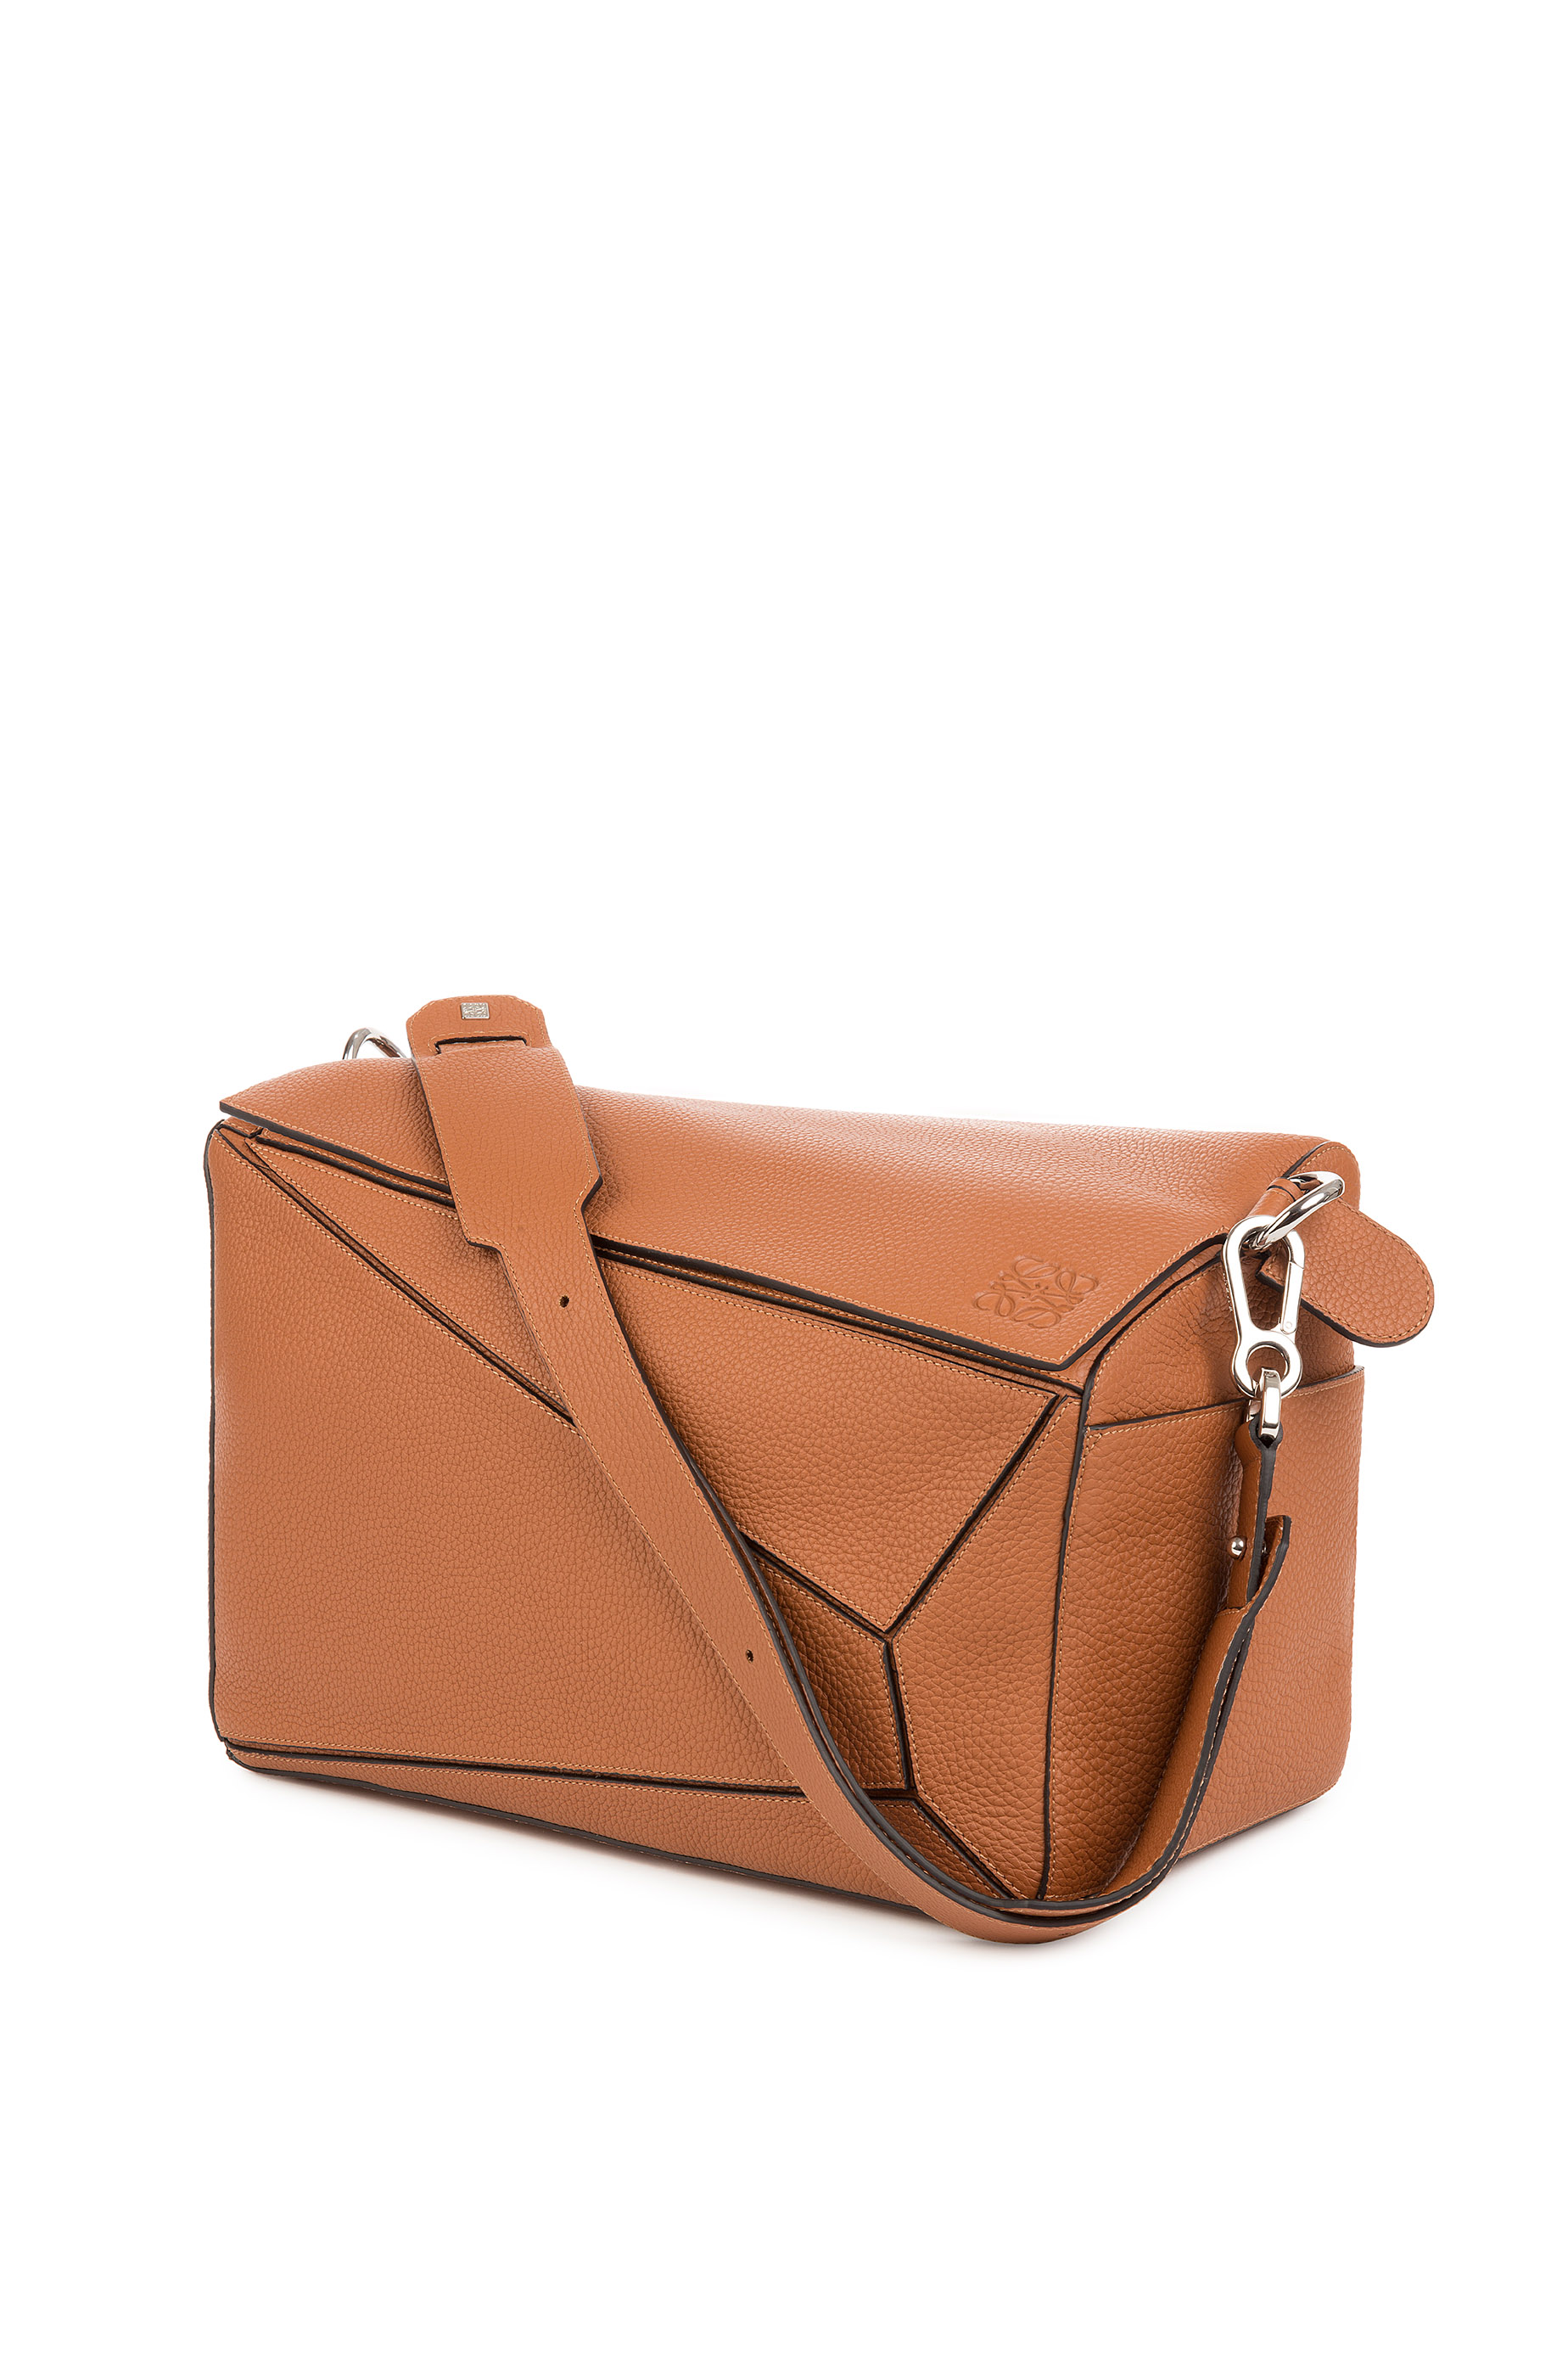 XL Puzzle bag in grained calfskin Tan 